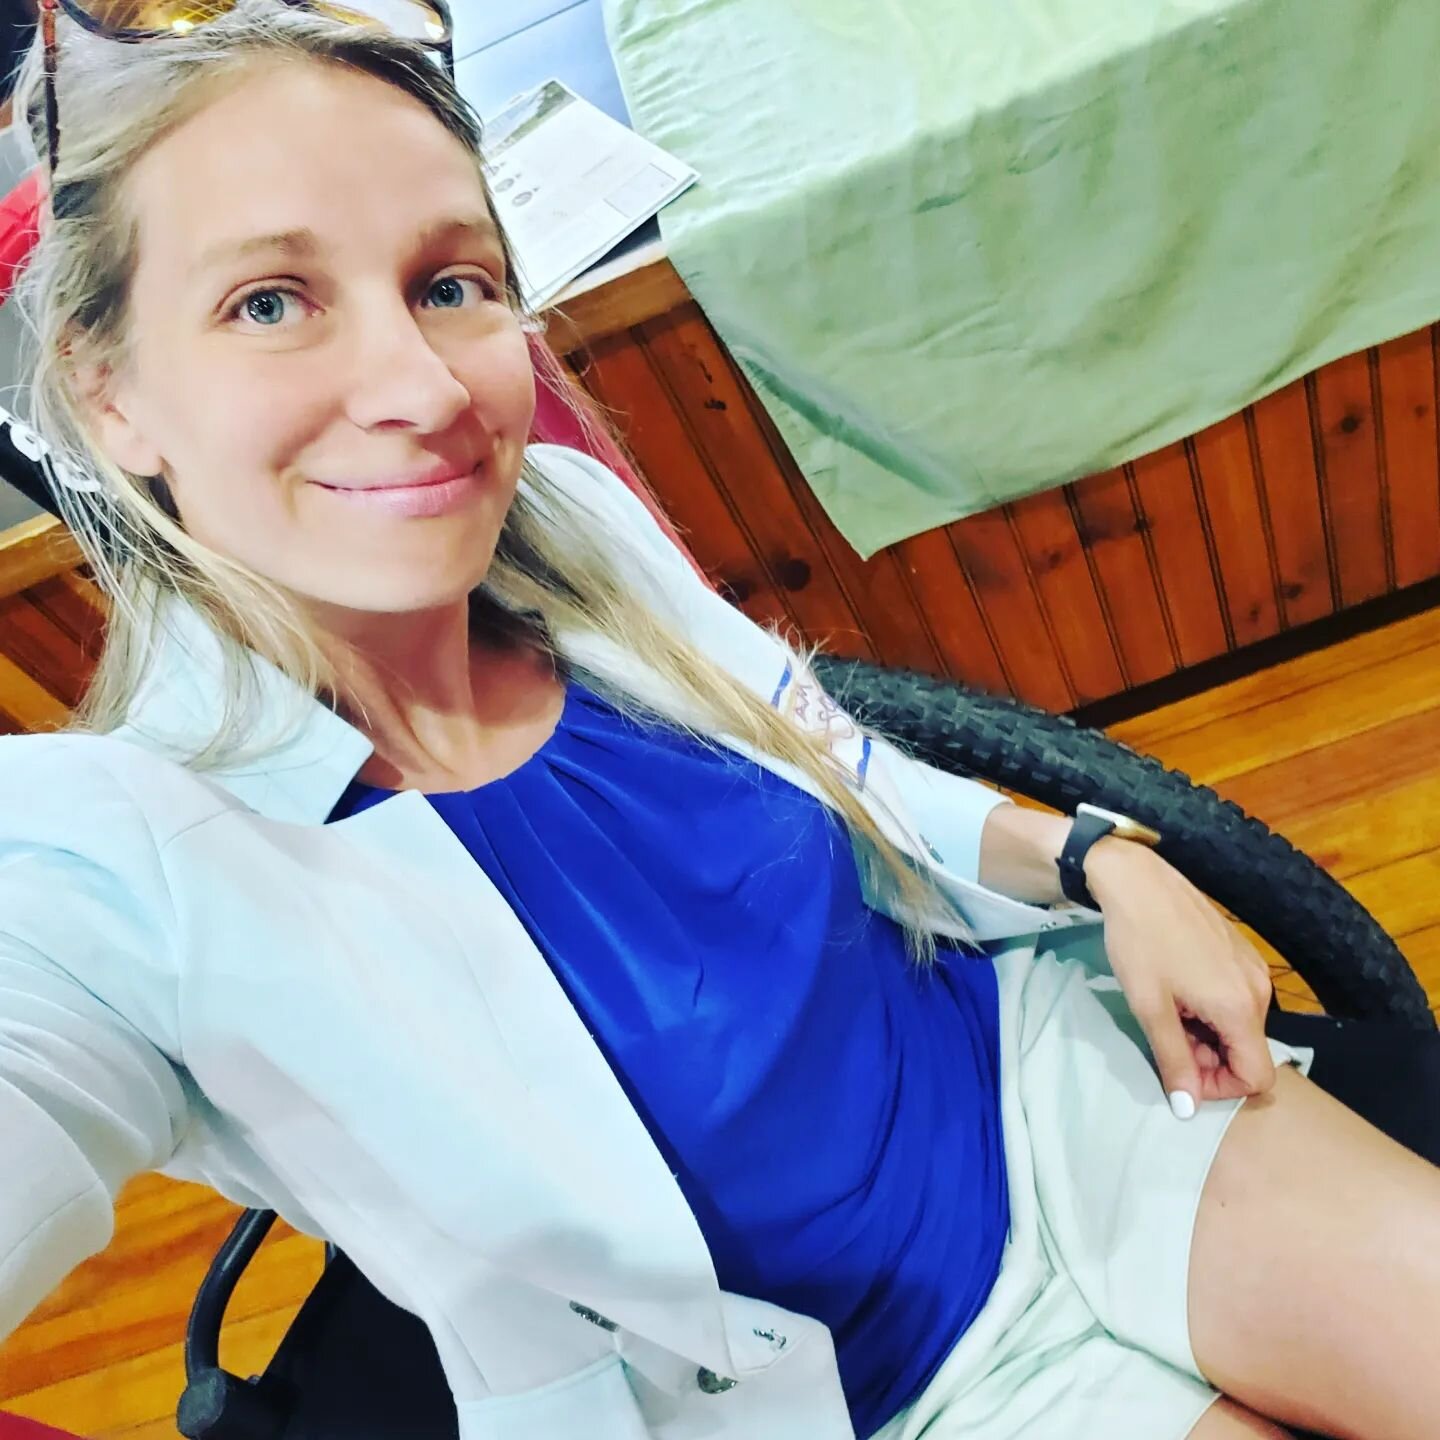 👩&zwj;🦽👨&zwj;🦽 GRIT FREEDOM CHAIR! It's a wheelchair set up for TRAIL HIKING / Riding! 

I'm at the Citizens Climate Lobby event at the Fitchburg MA Senior Center and the North County Land Trust has a Grit Freedom Chair (actually 2) that can be b